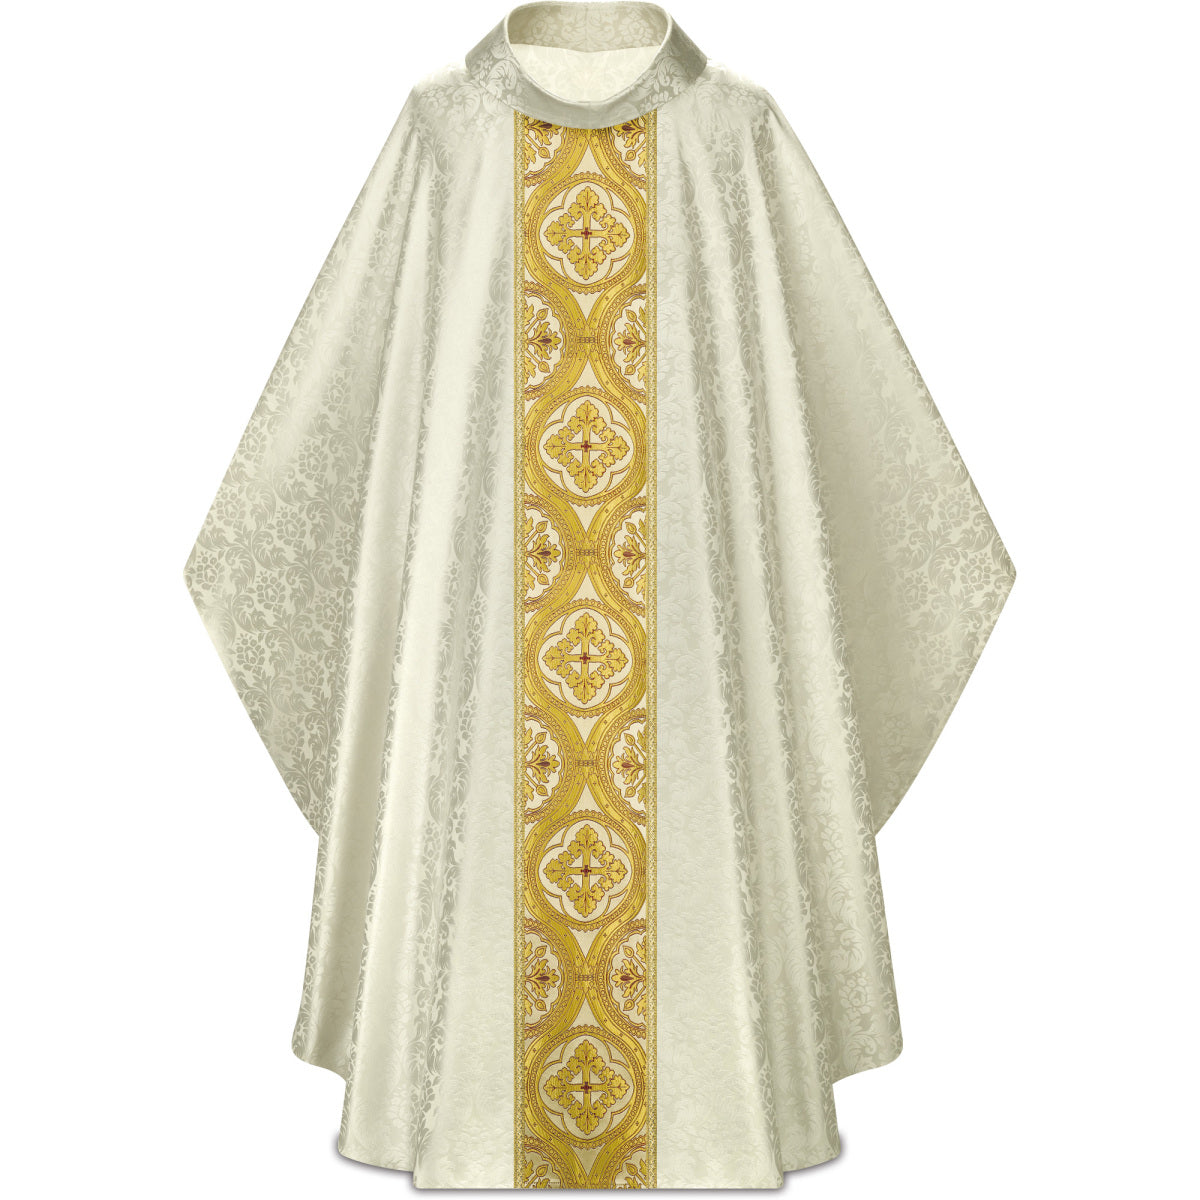 Chasuble in Duomo Damask Fabric with Gold Brocade